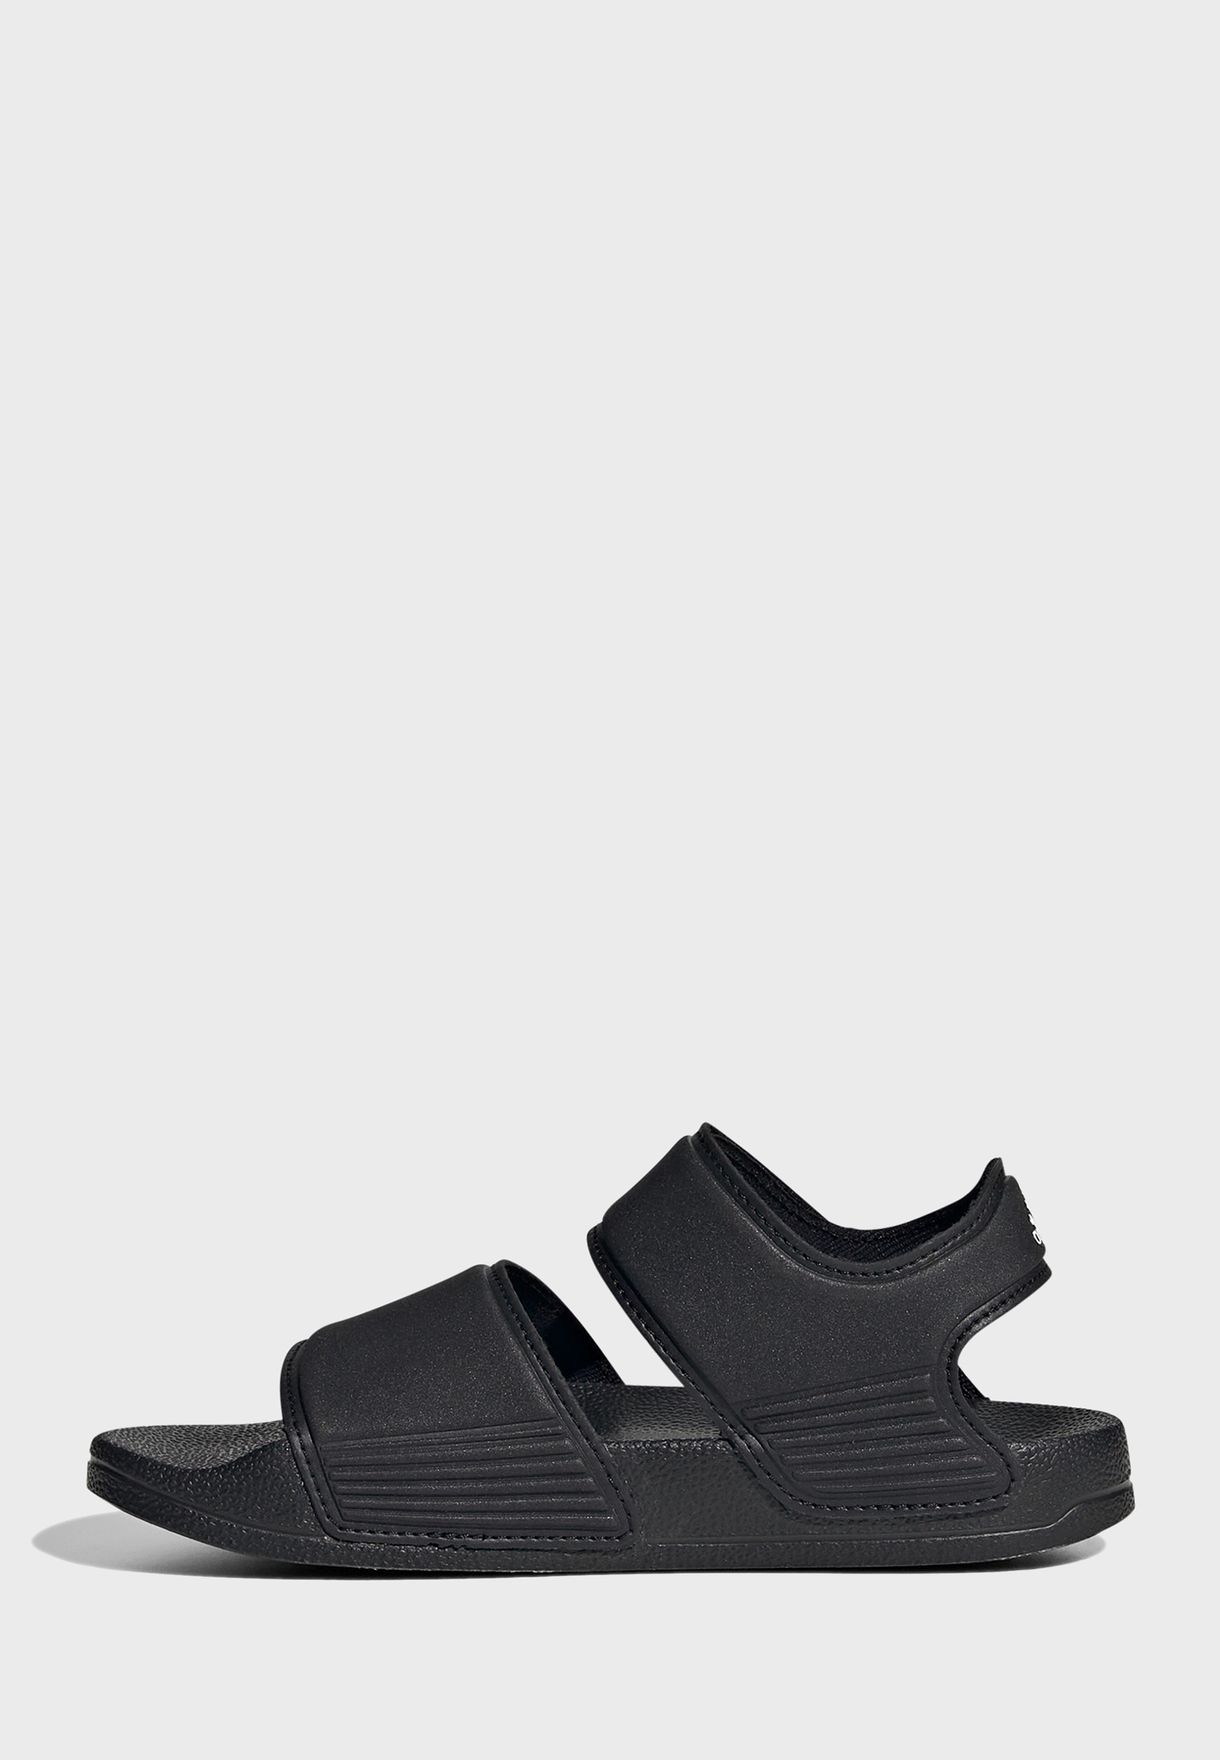 Youth Adilette Sandals